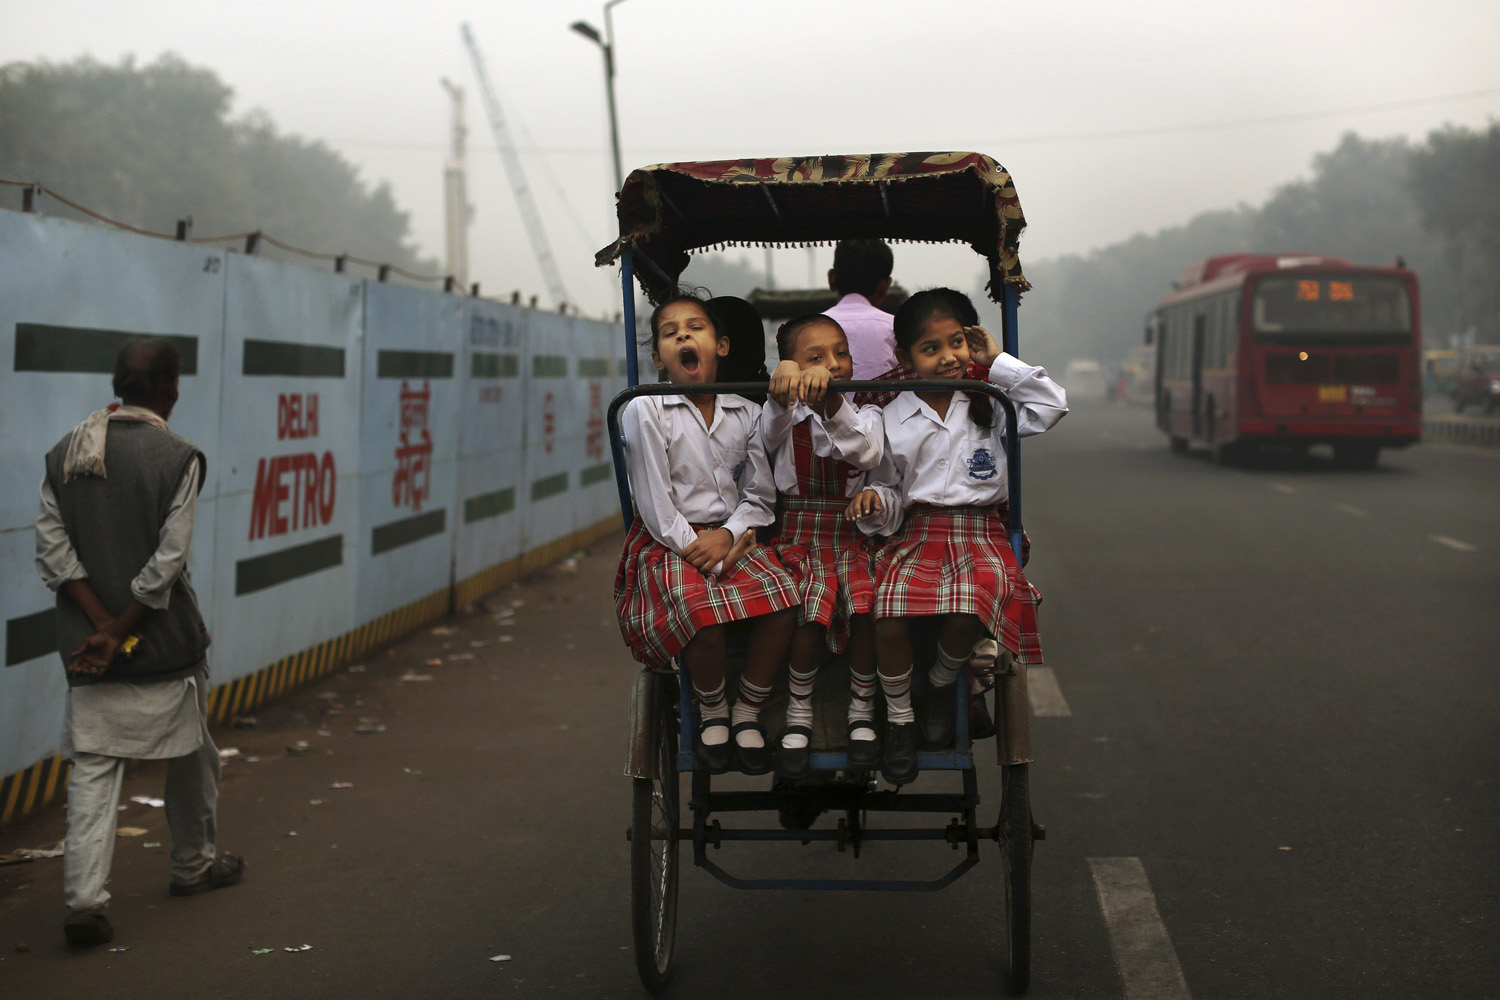 Image: Oct. 31, 2012. An Indian schoolgirl yawns as she rides with friends to school on a bicycle rickshaw in New Delhi.